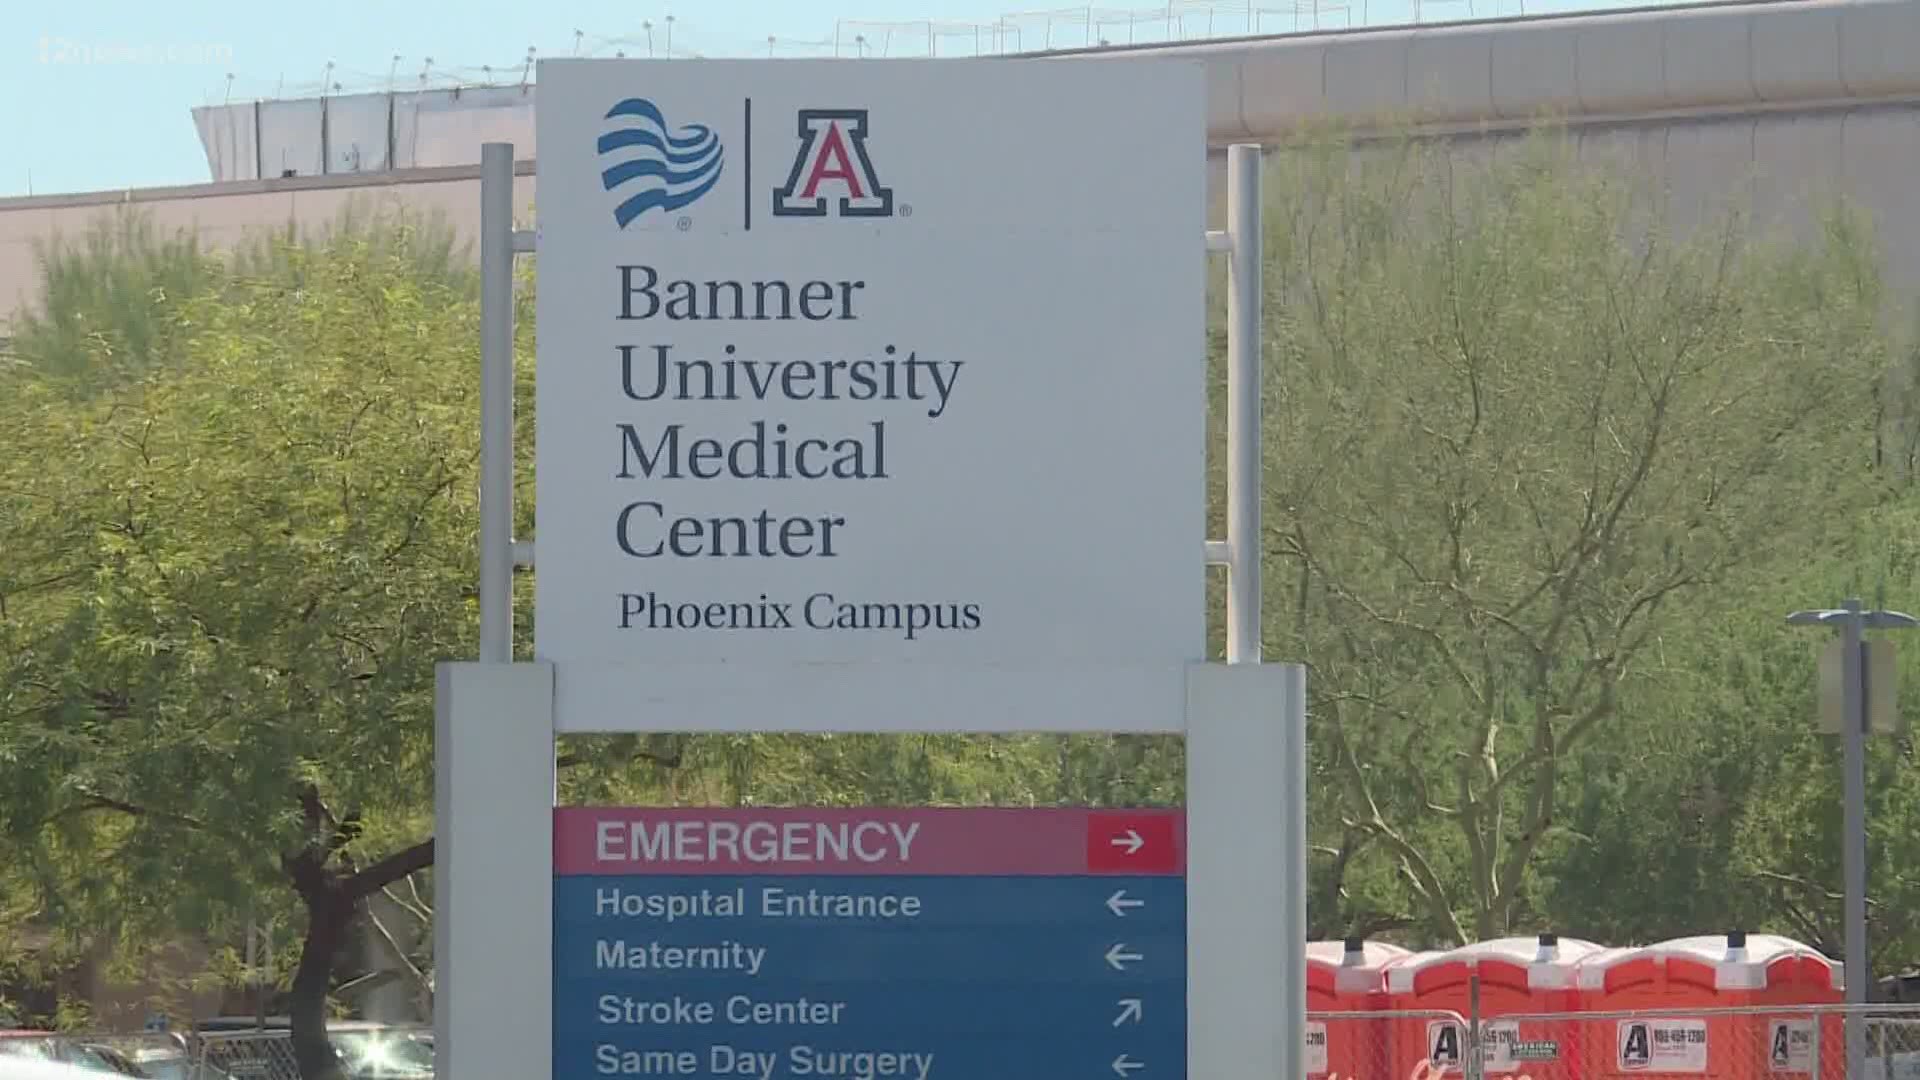 Hospitals say they still have room for new patients.
Intensive care beds in Arizona are nearing capacity but haven't reached their limit yet.